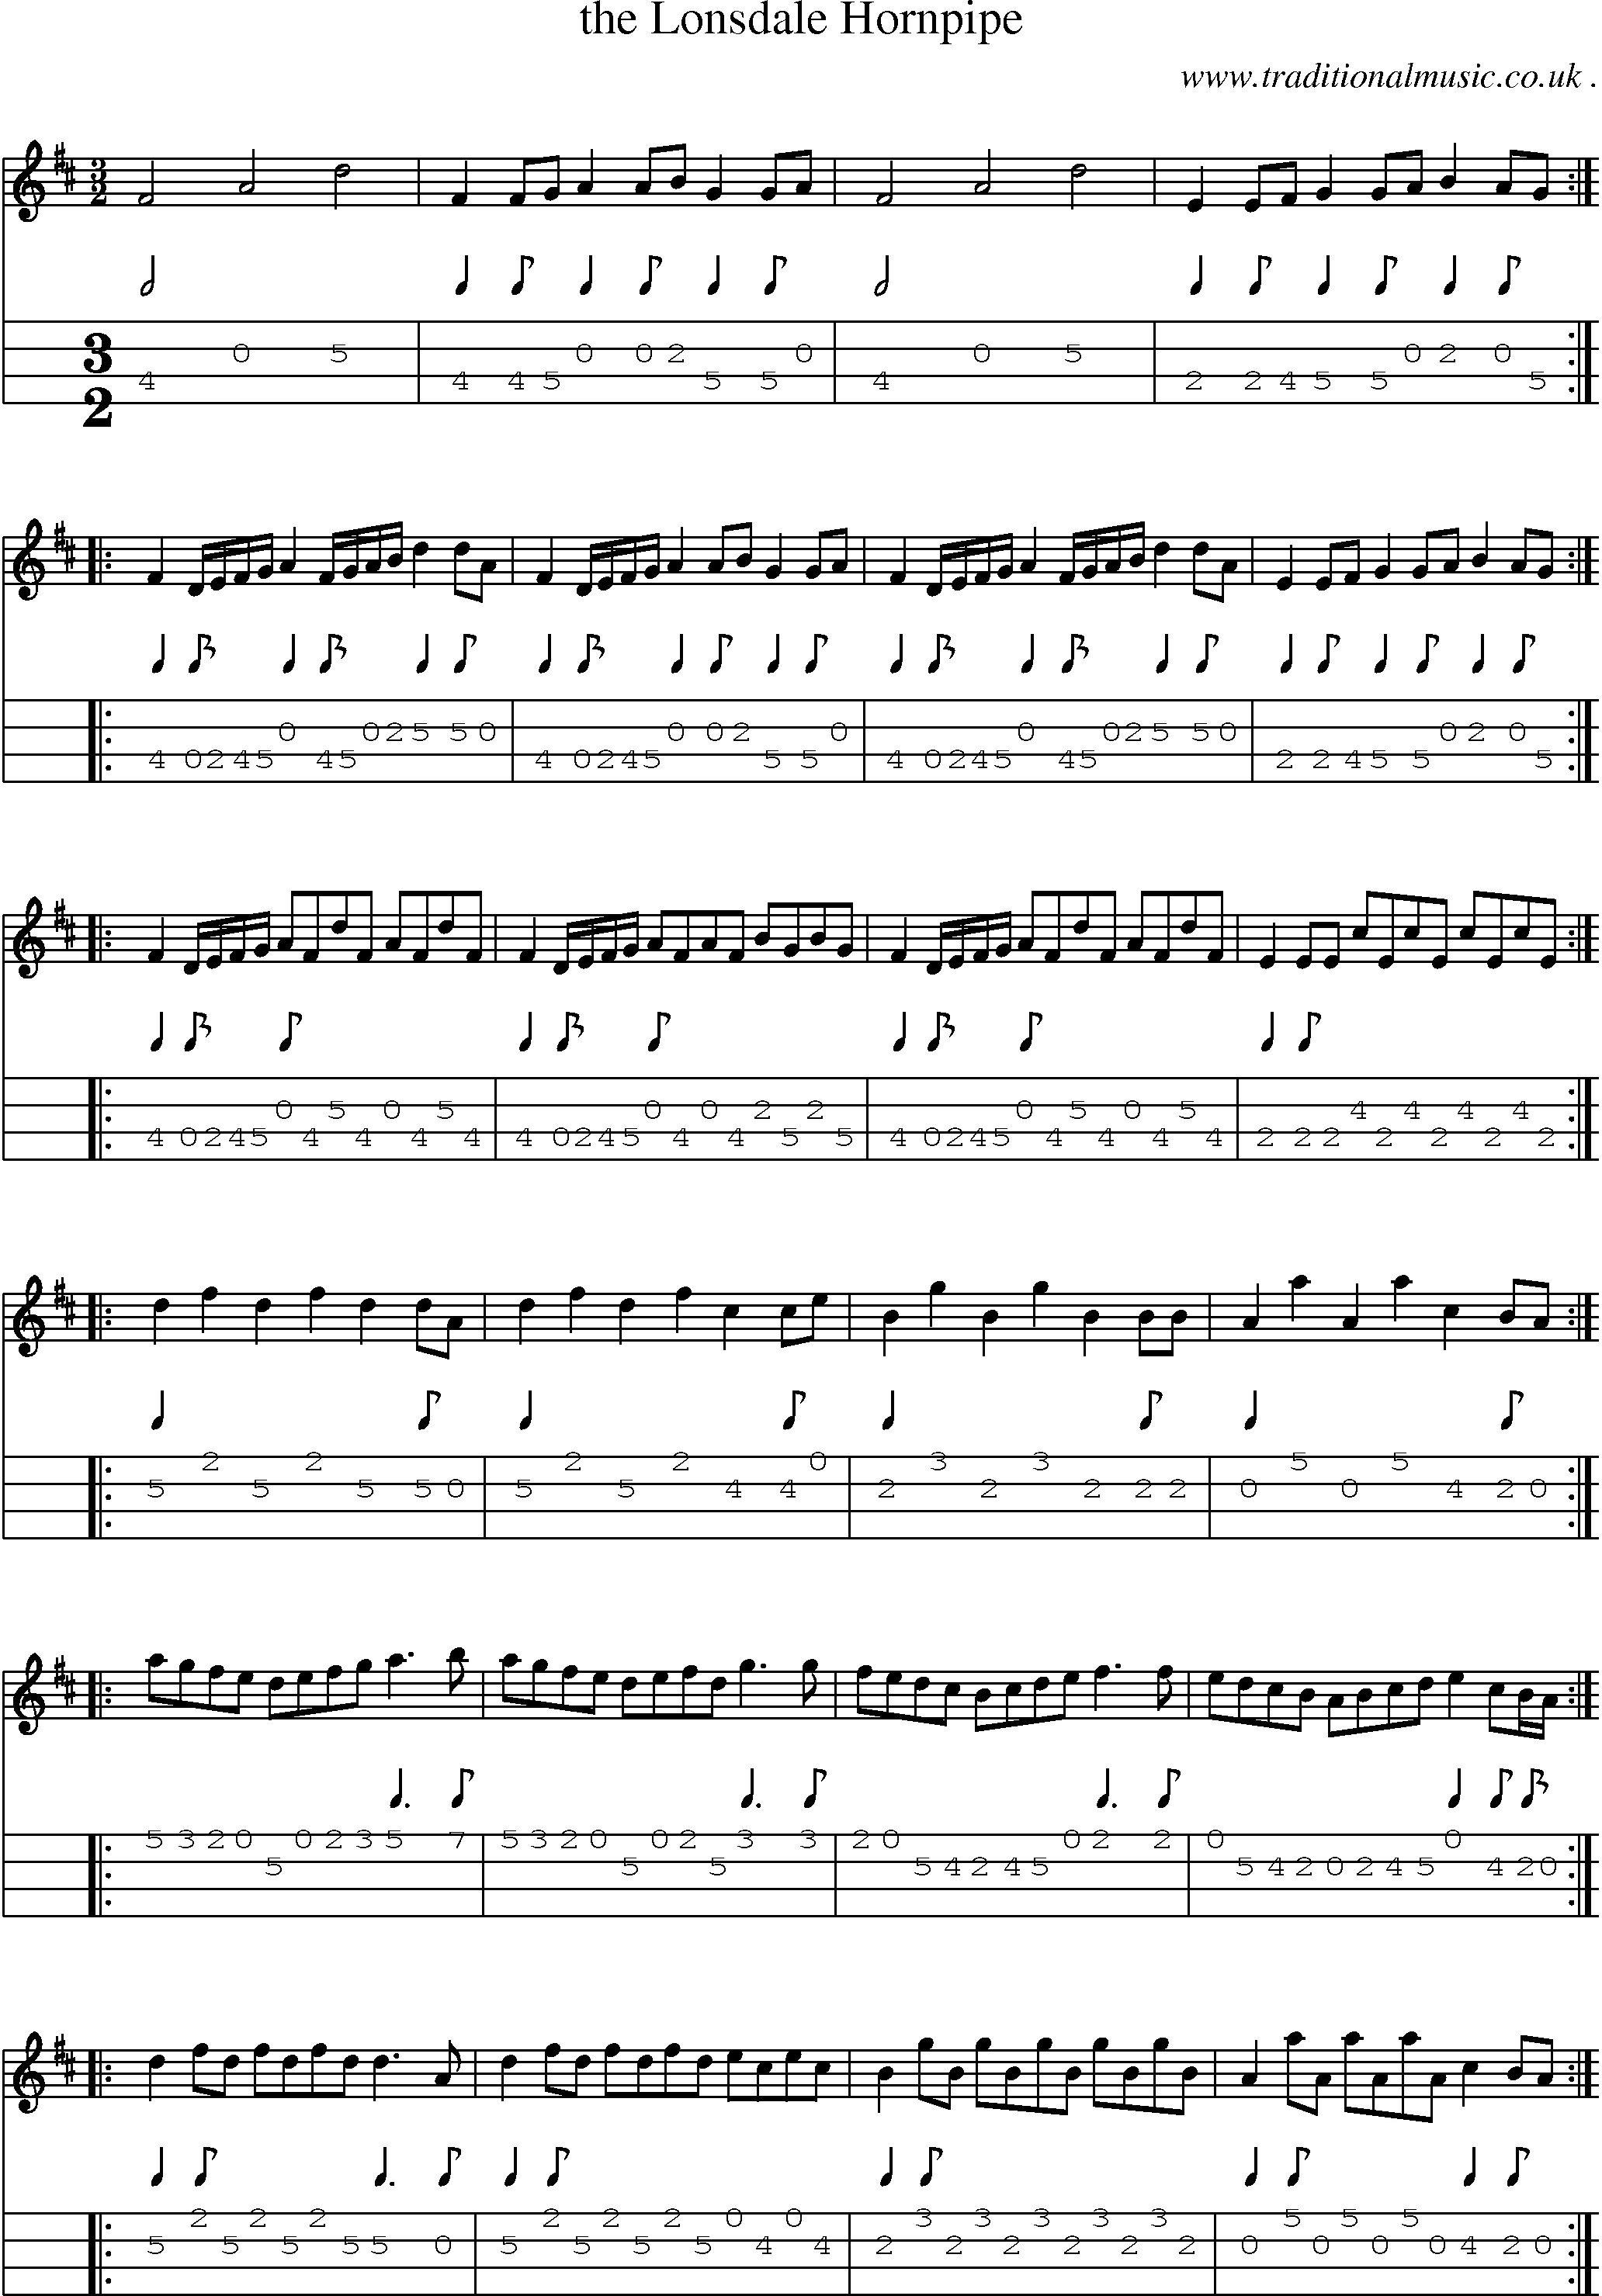 Sheet-Music and Mandolin Tabs for The Lonsdale Hornpipe